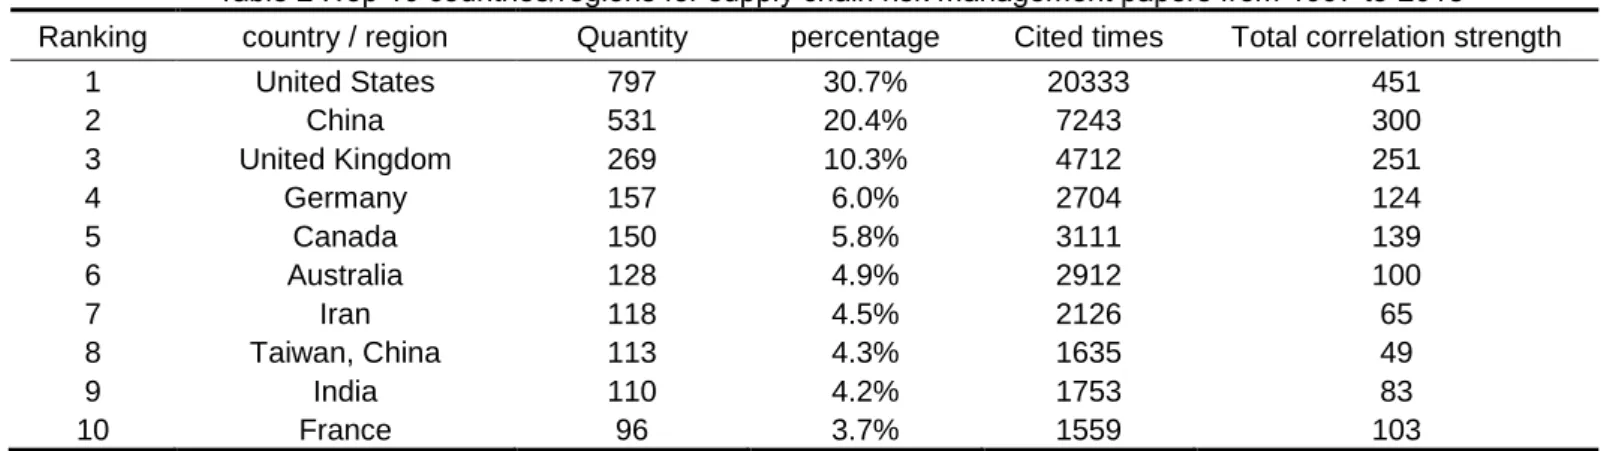 Table 2 .Top 10 countries/regions for supply chain risk management papers from 1997 to 2018  Ranking  country / region  Quantity  percentage  Cited times  Total correlation strength 